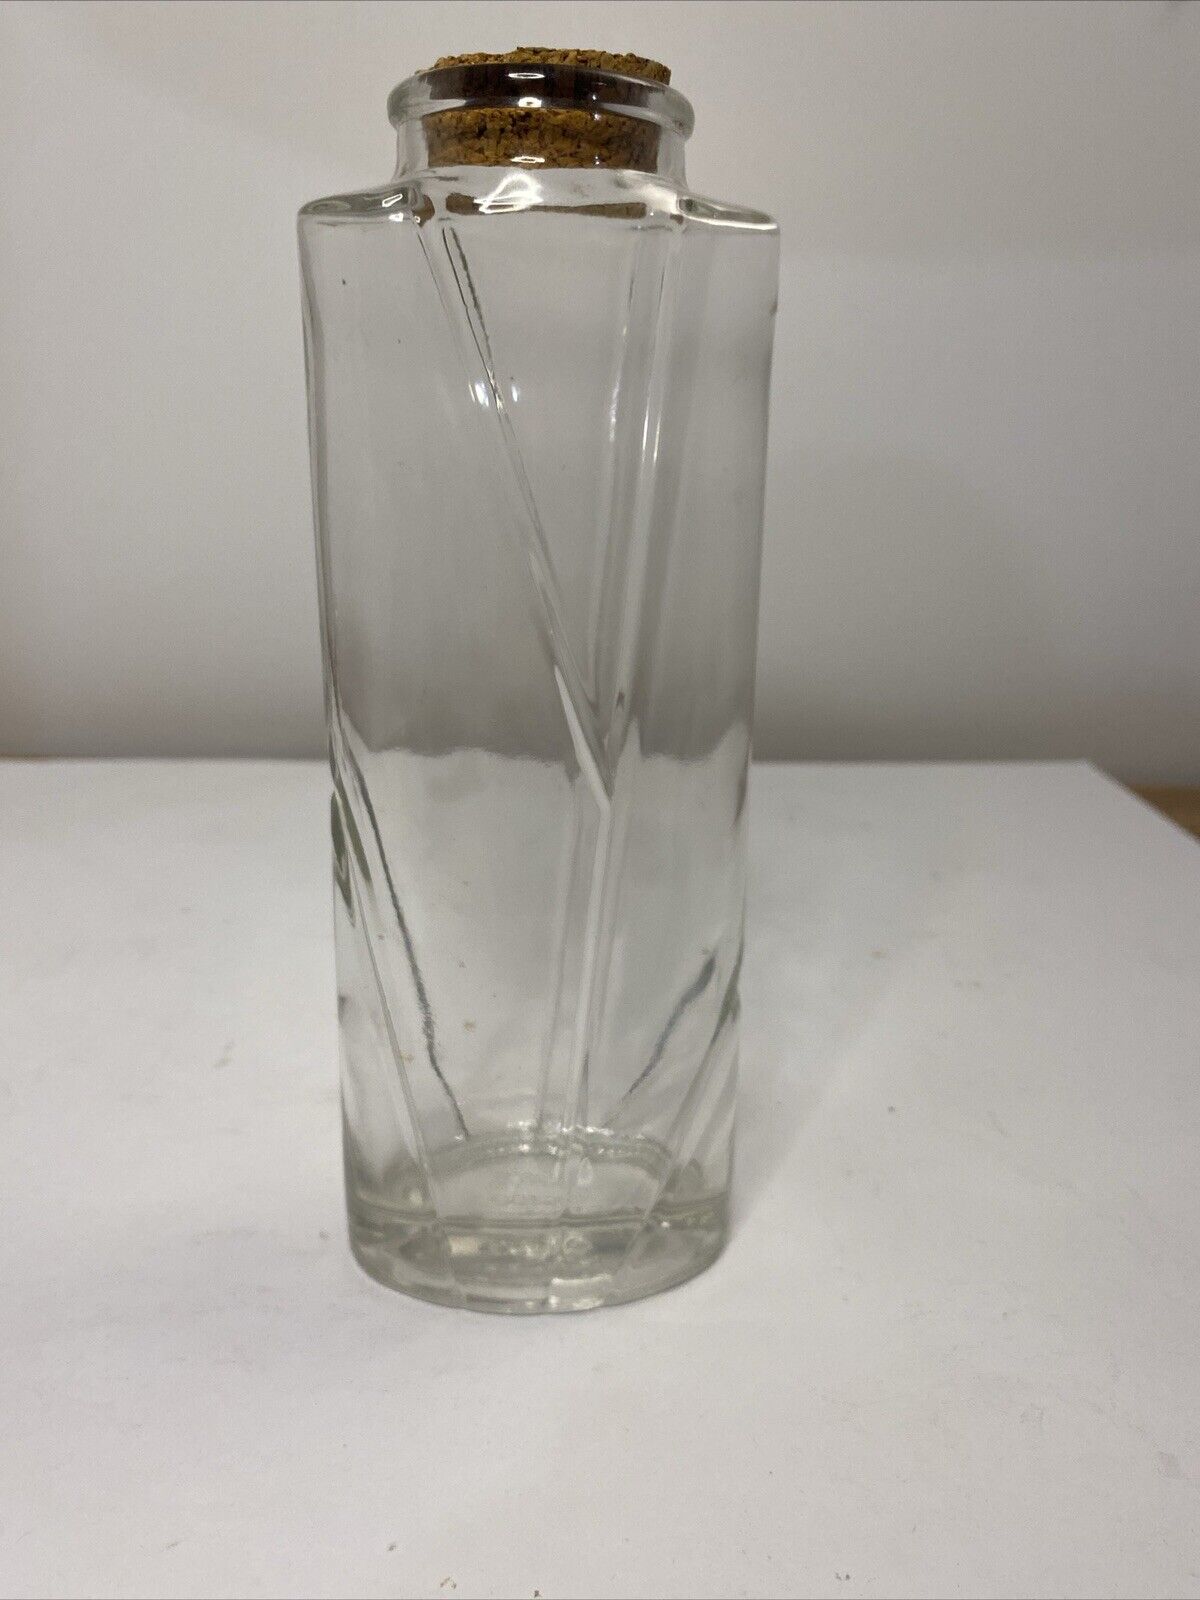 Vintage Ann\'s House of Nuts Clear Glass Canister Bottle Jar W/ Cork Lid 9.5”Tall